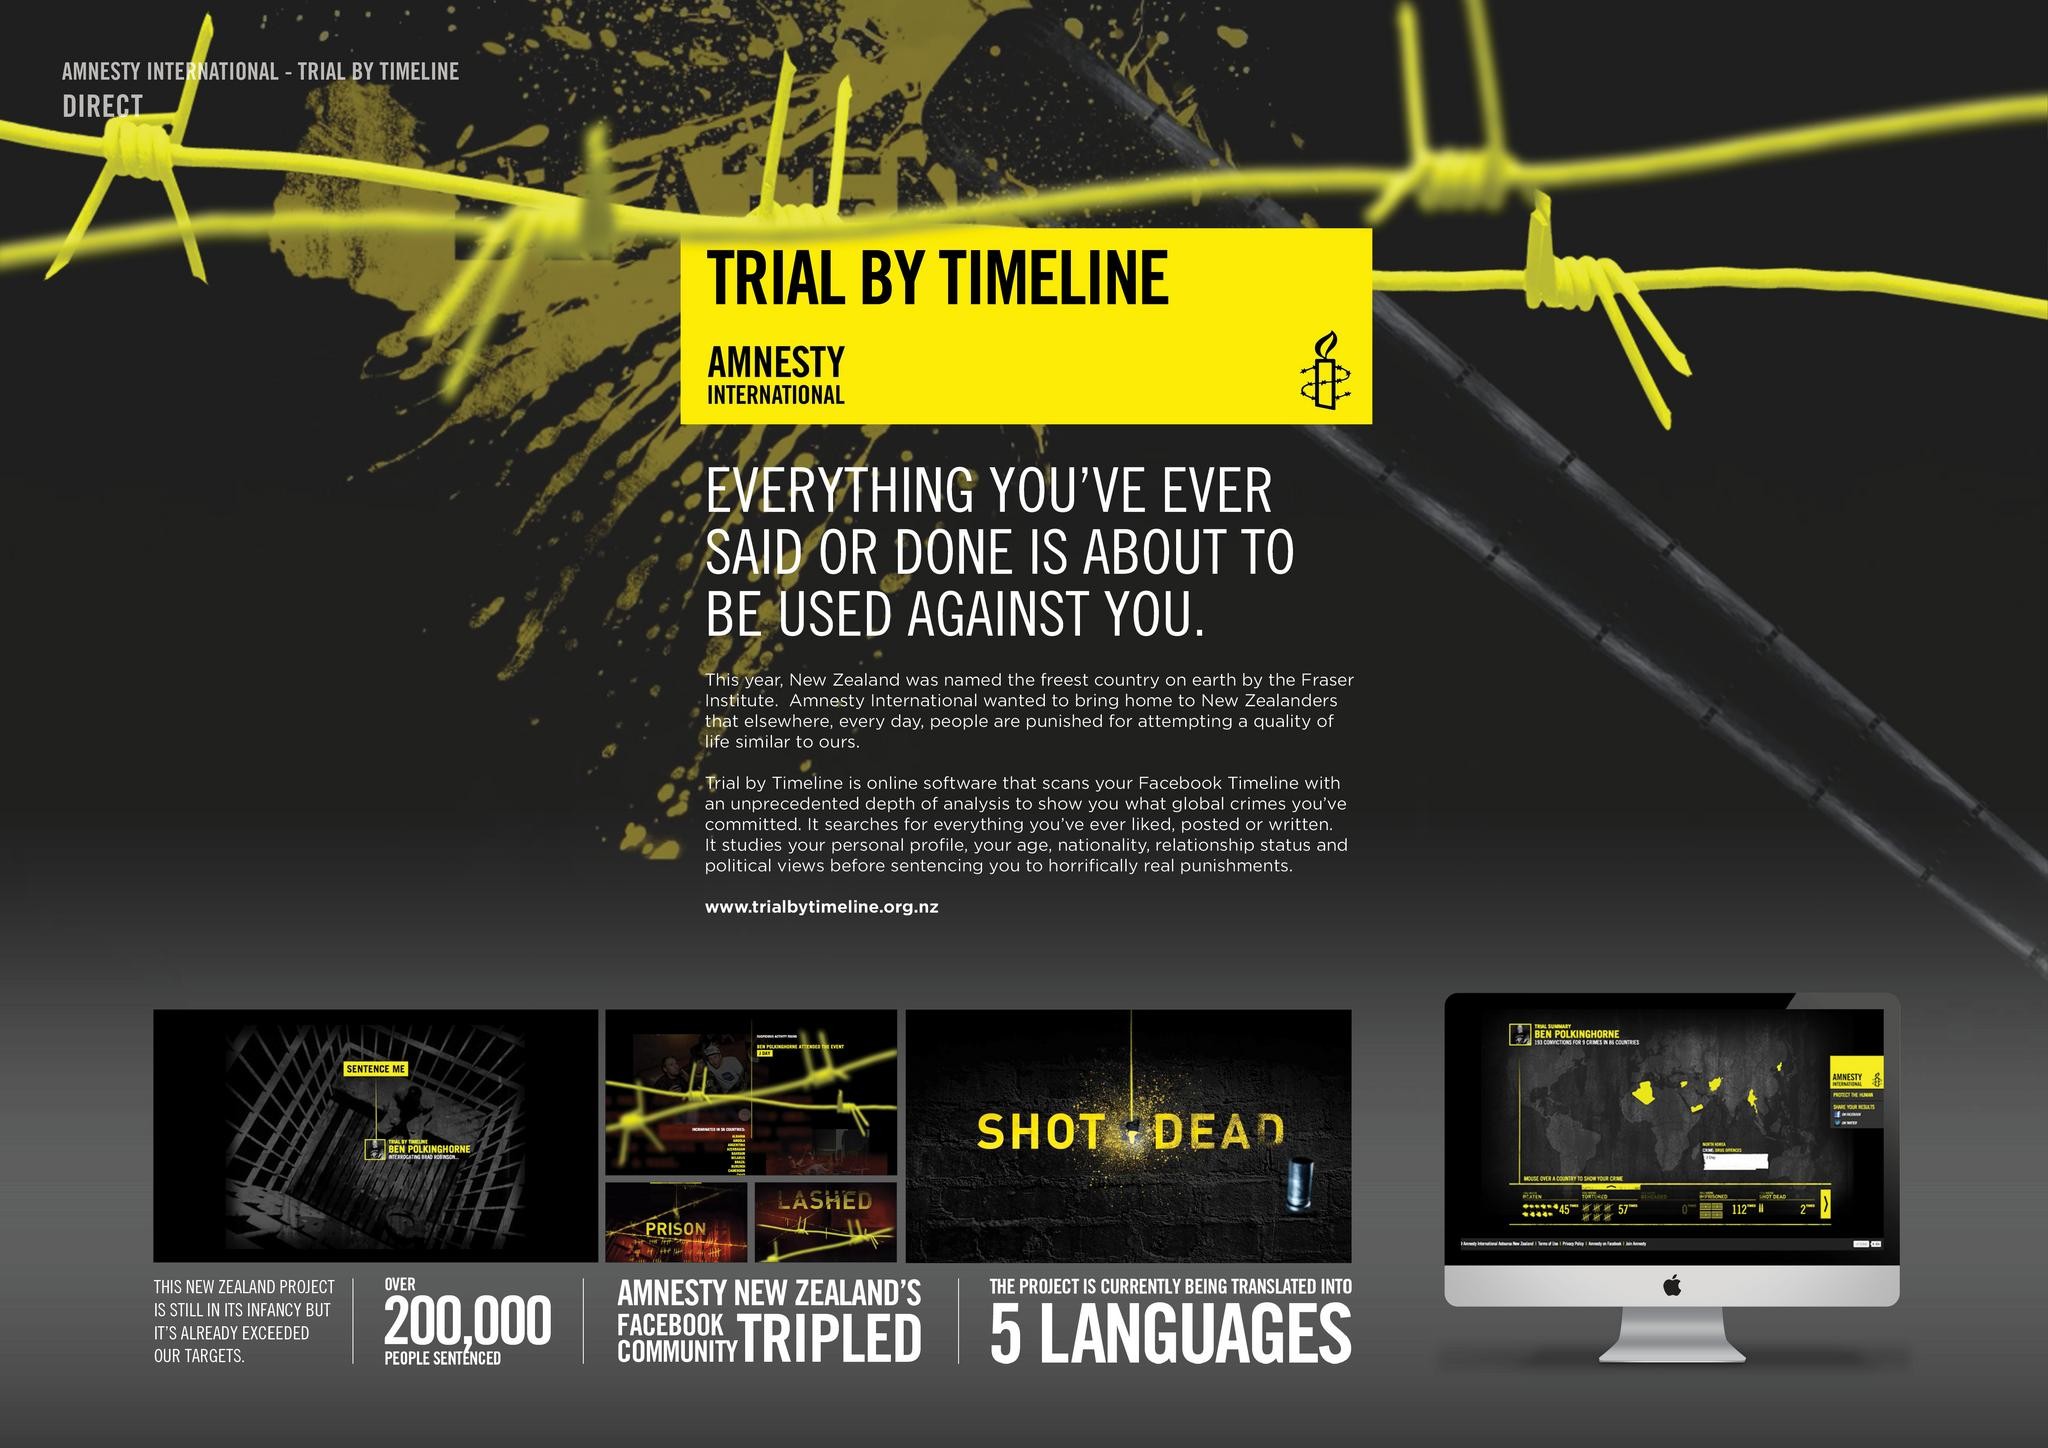 TRIAL BY TIMELINE